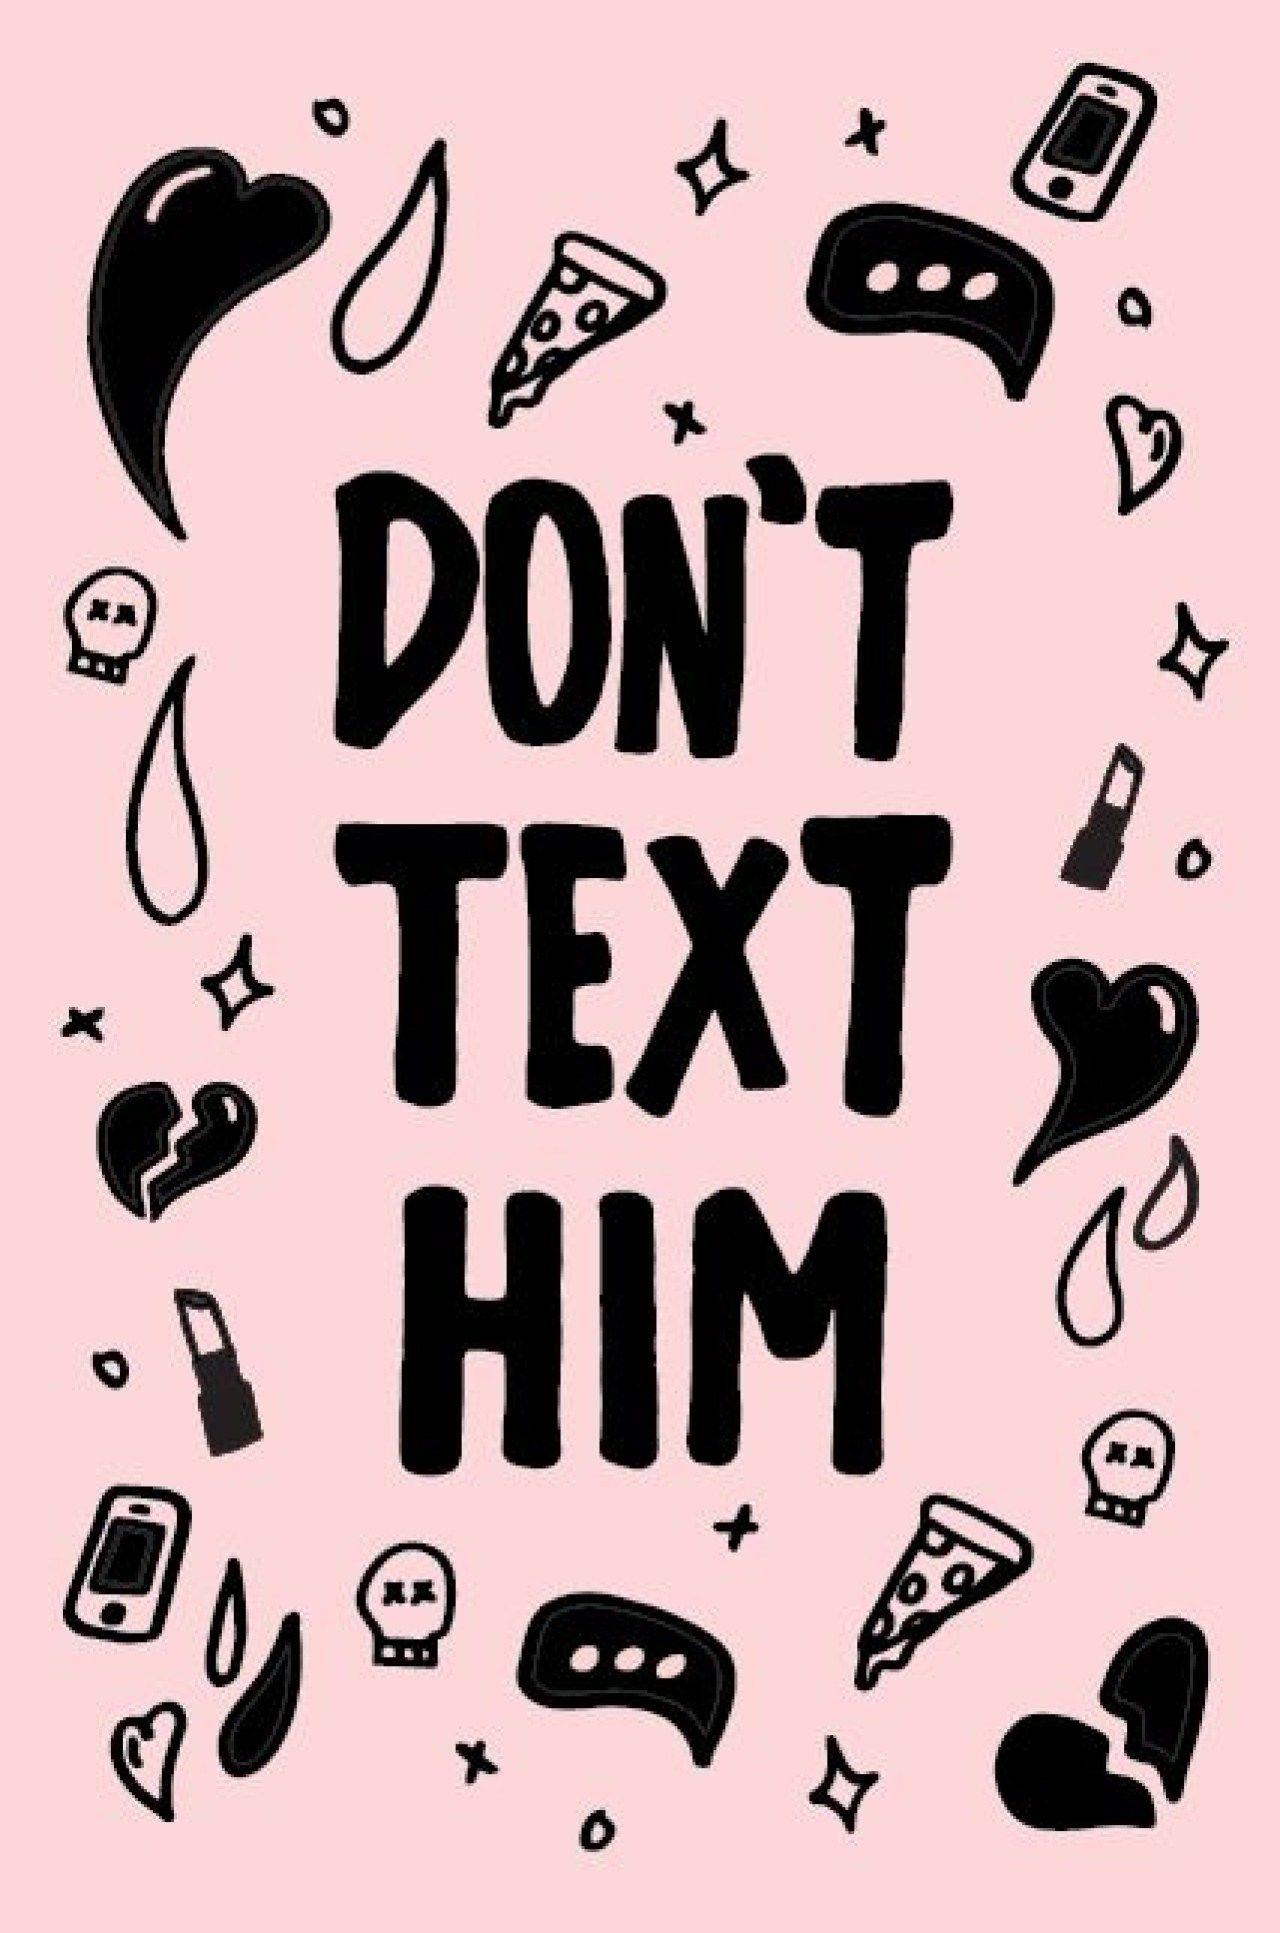 Sassy iPhone Wallpaper You Need in Your Life